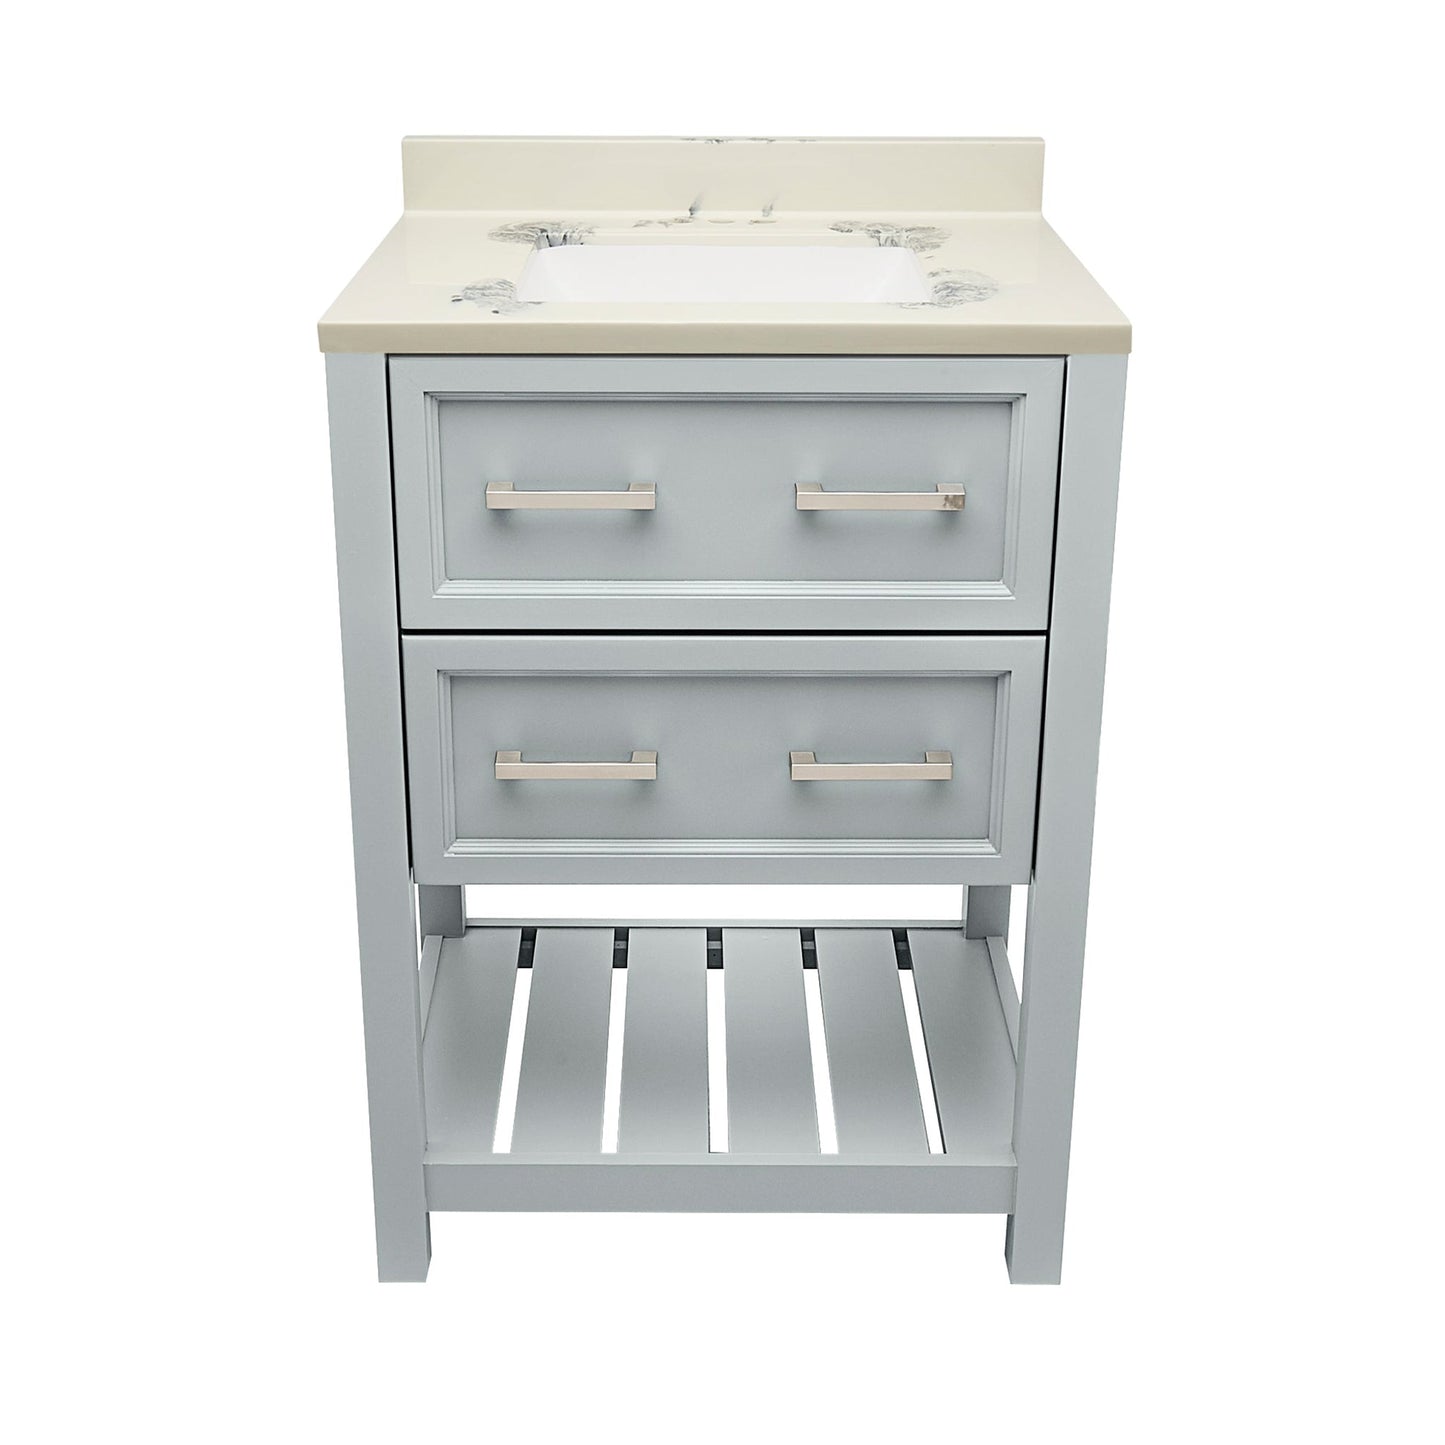 Ella's Bubbles Tremblant 25" Gray Bathroom Vanity With Carrara White Cultured Marble Top With Backsplash and Sink